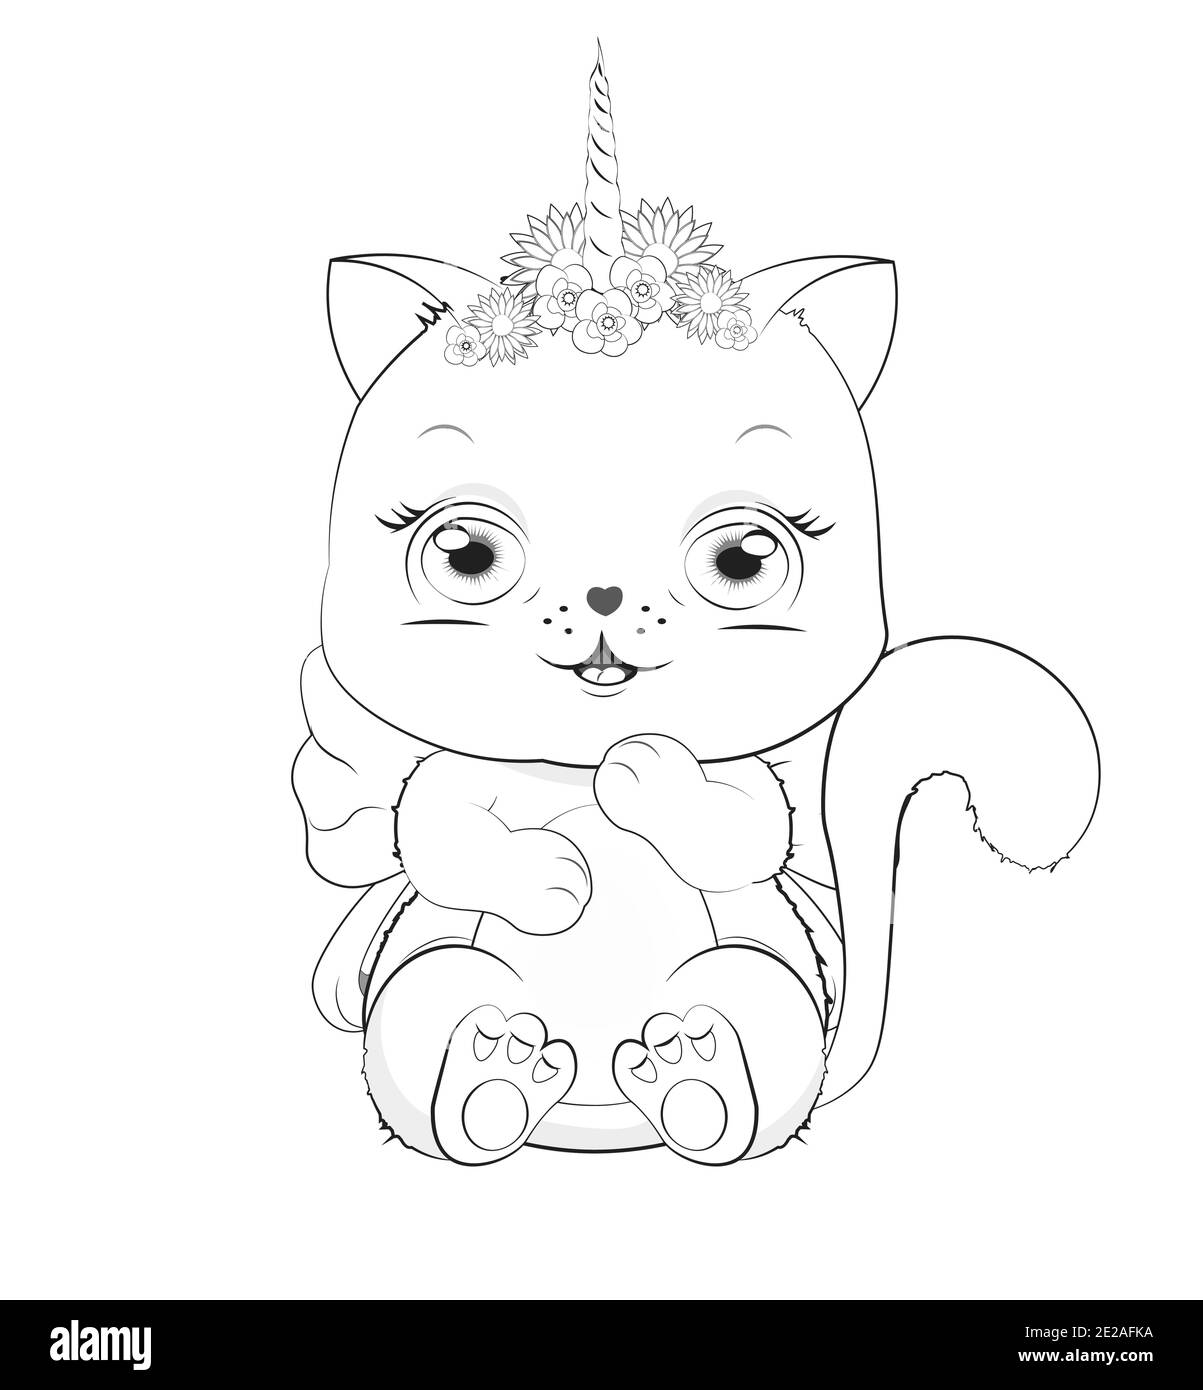 Coloring book white cat girl kitten with bow unicorn horn picture in hand drawing cartoon style for print design greeting birthday card postcard stock vector image art